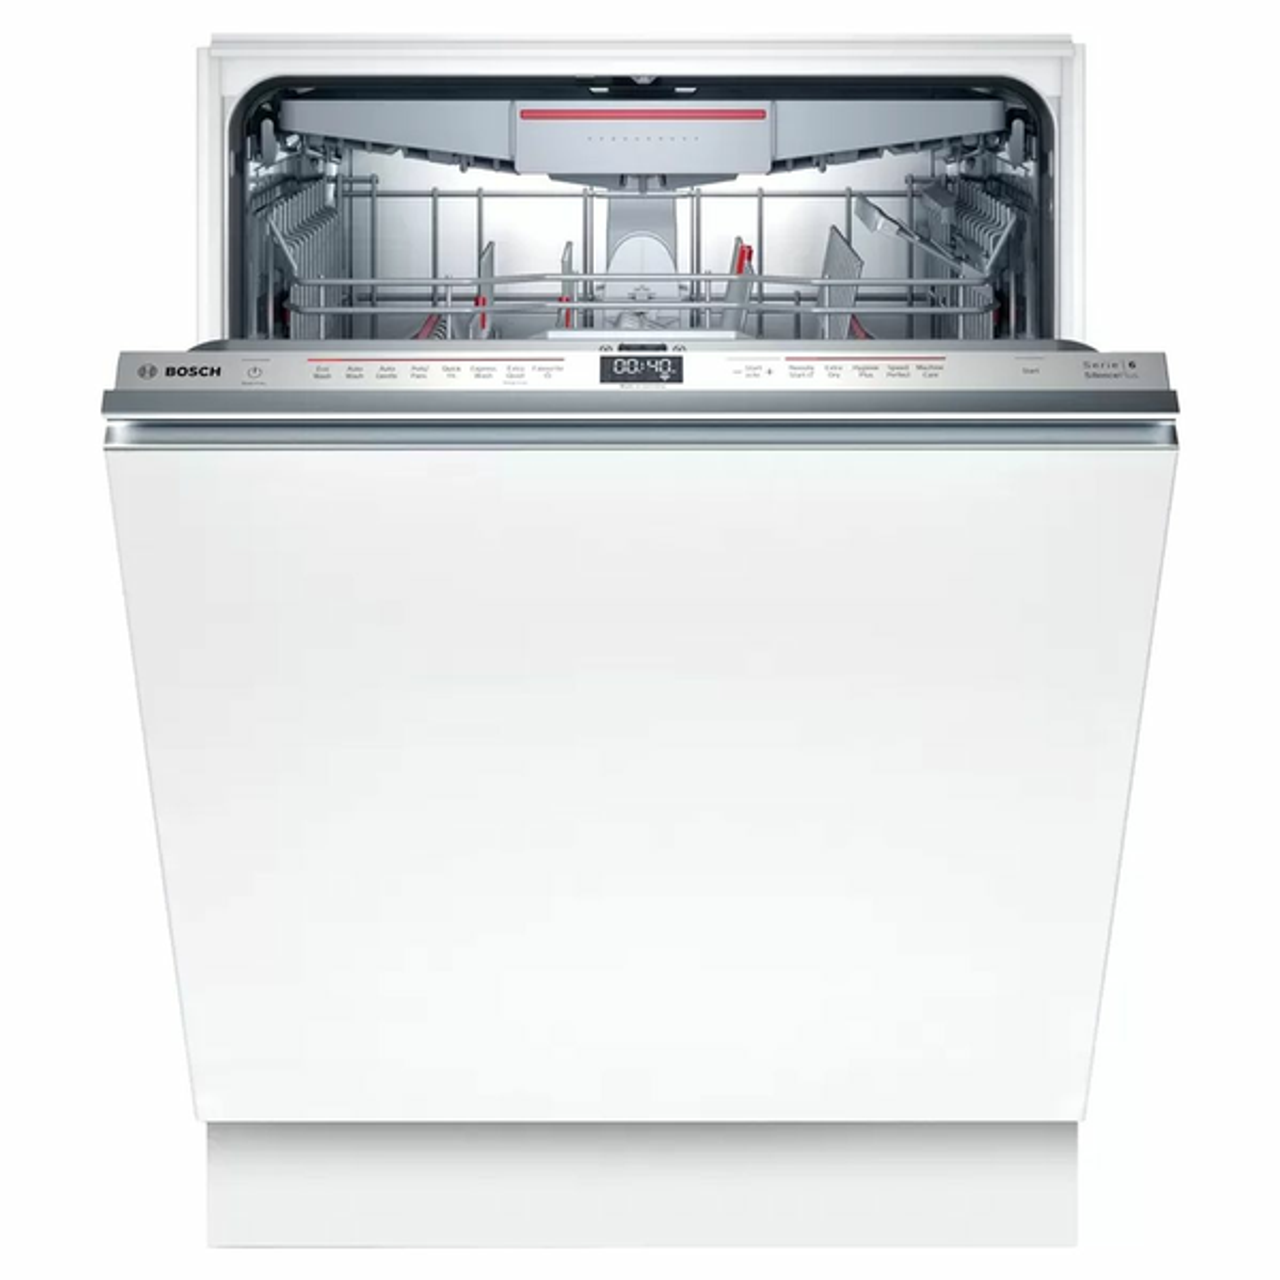 SMV6HCX01A - 60cm Series 6 Fully-Integrated Dishwasher